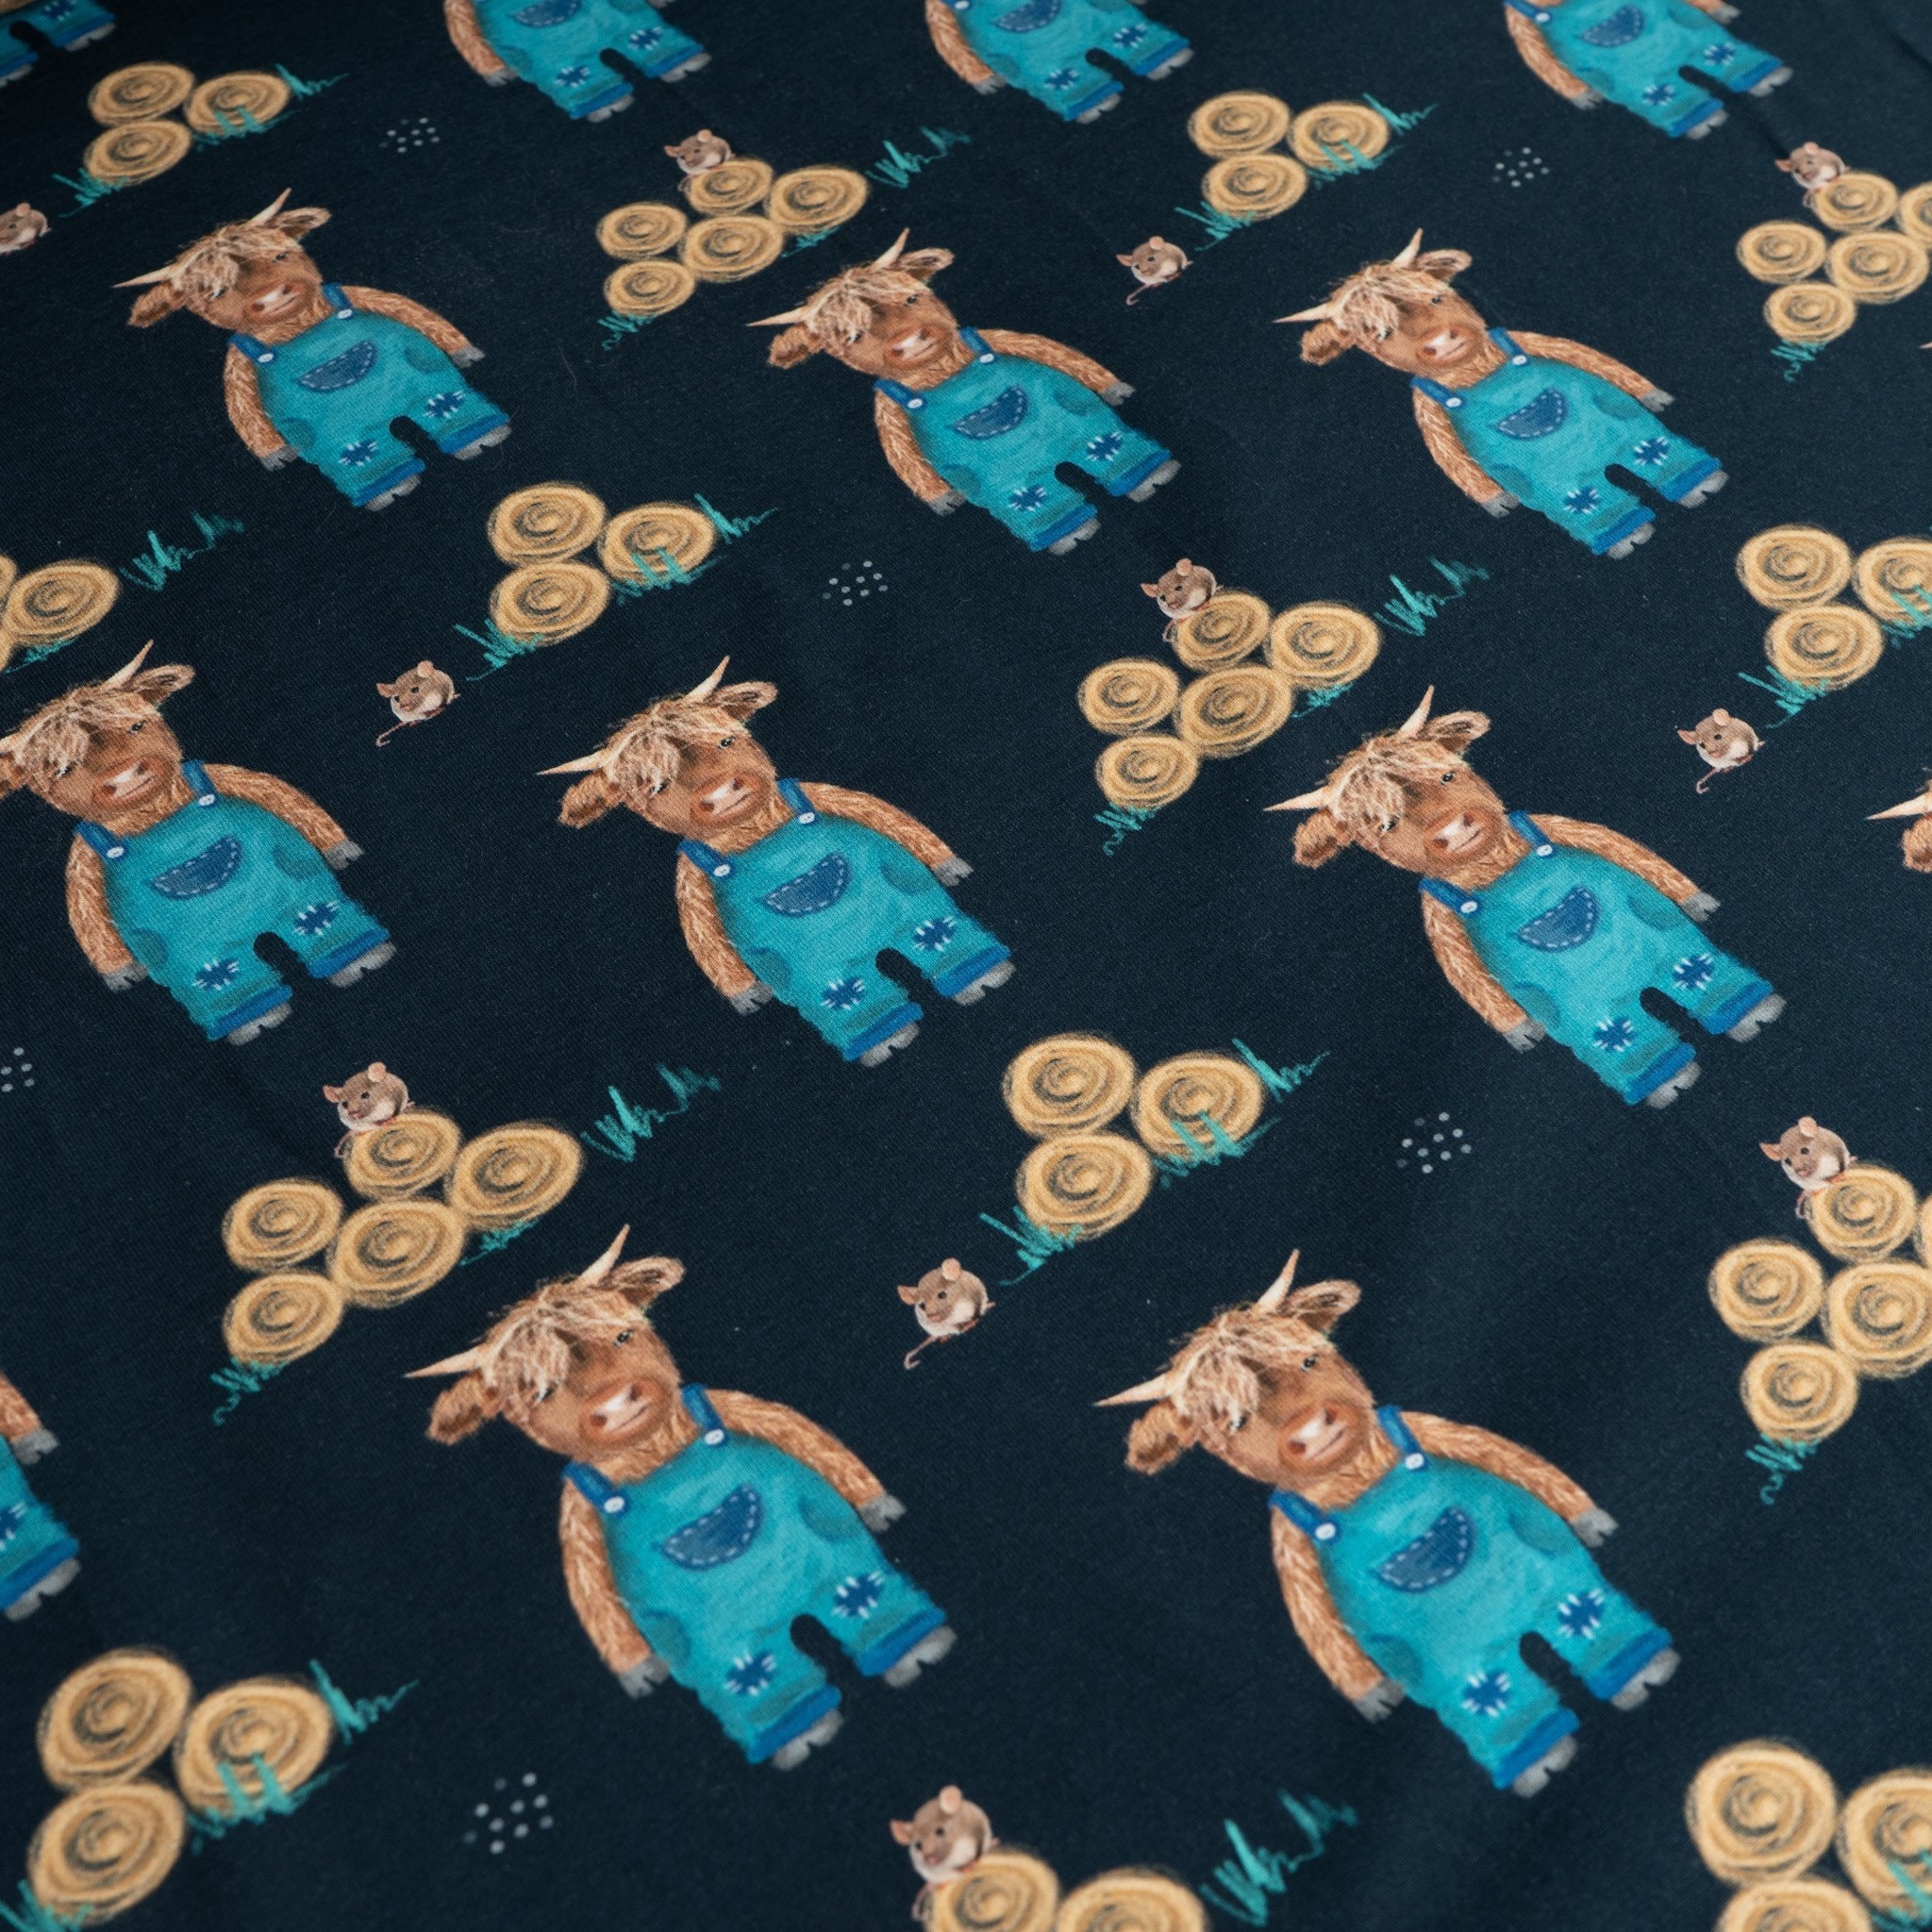 Highland Cow Floral Fabric, Fabric by the Yard, Cate and Rainn, Avaleigh Highland  Cow, Quilting Cotton, Bamboo, Canvas, Spandex, Rib Knit 